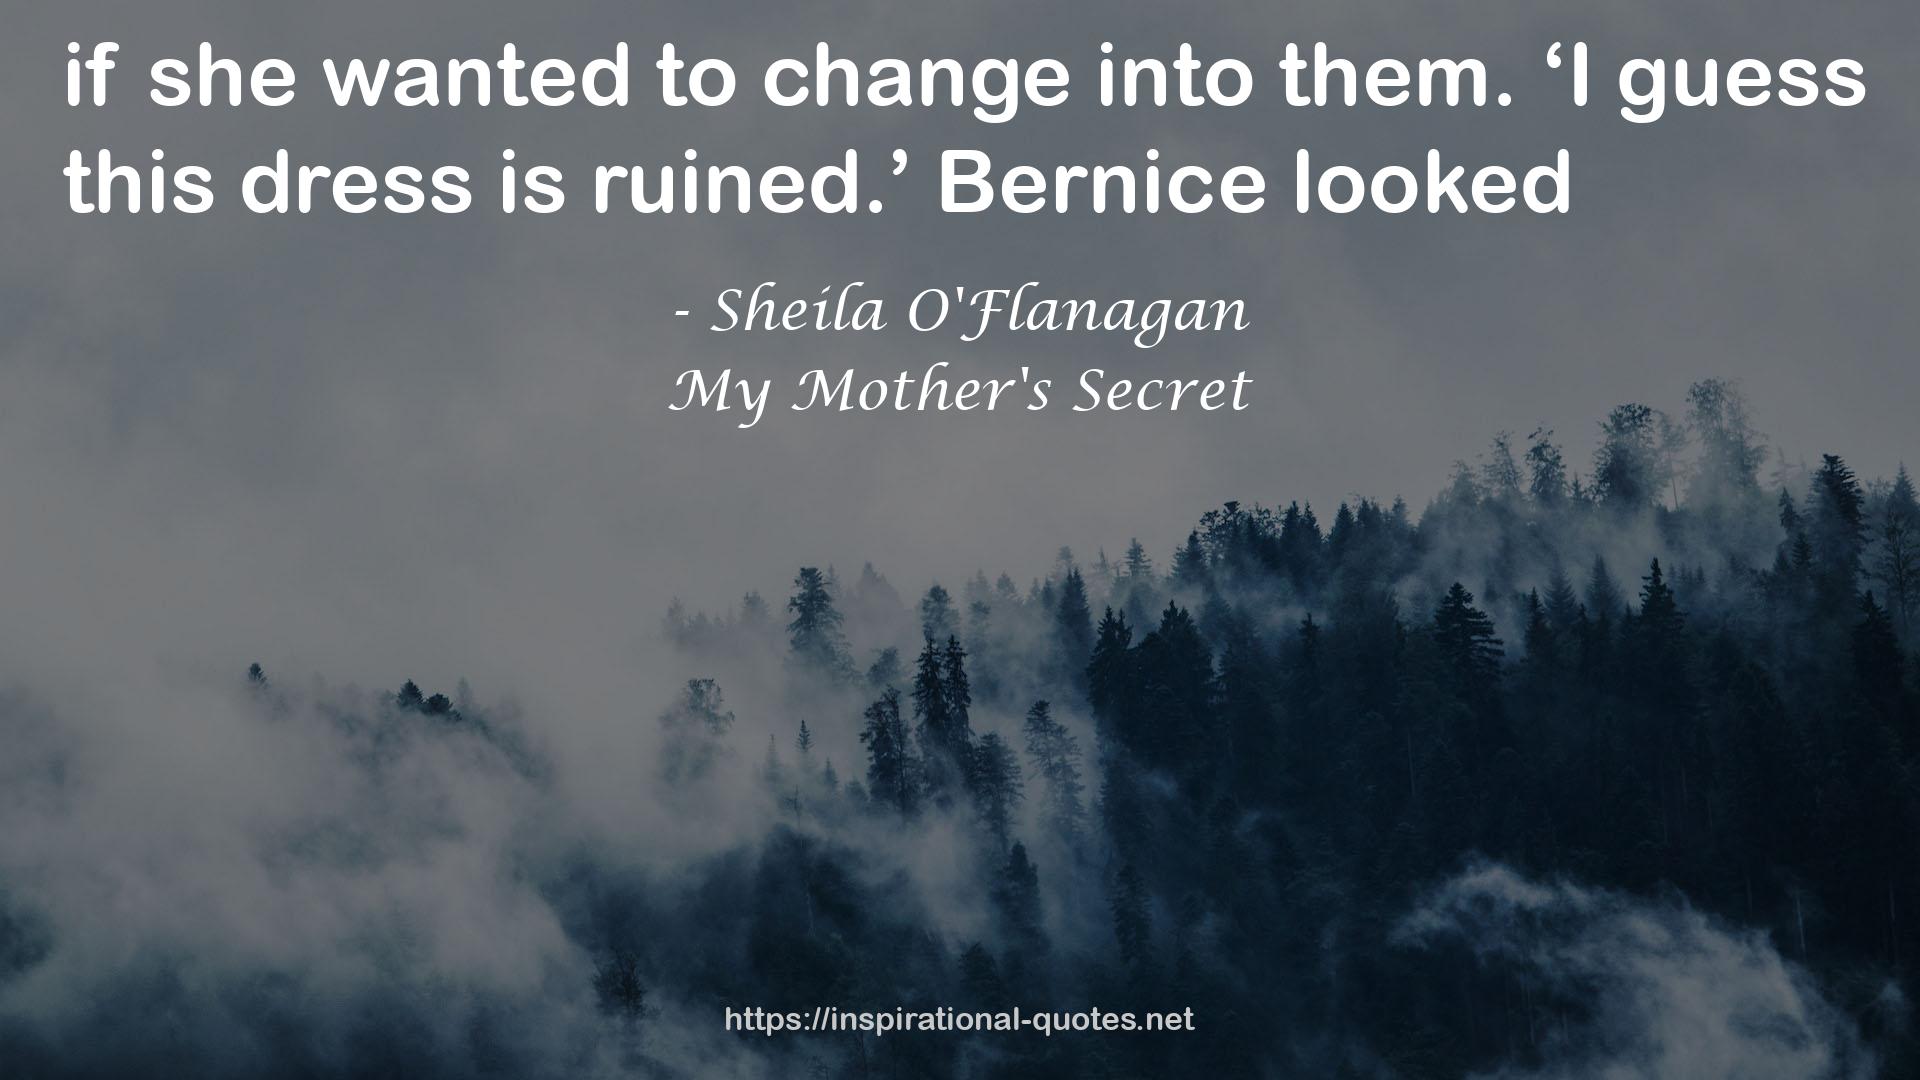 My Mother's Secret QUOTES